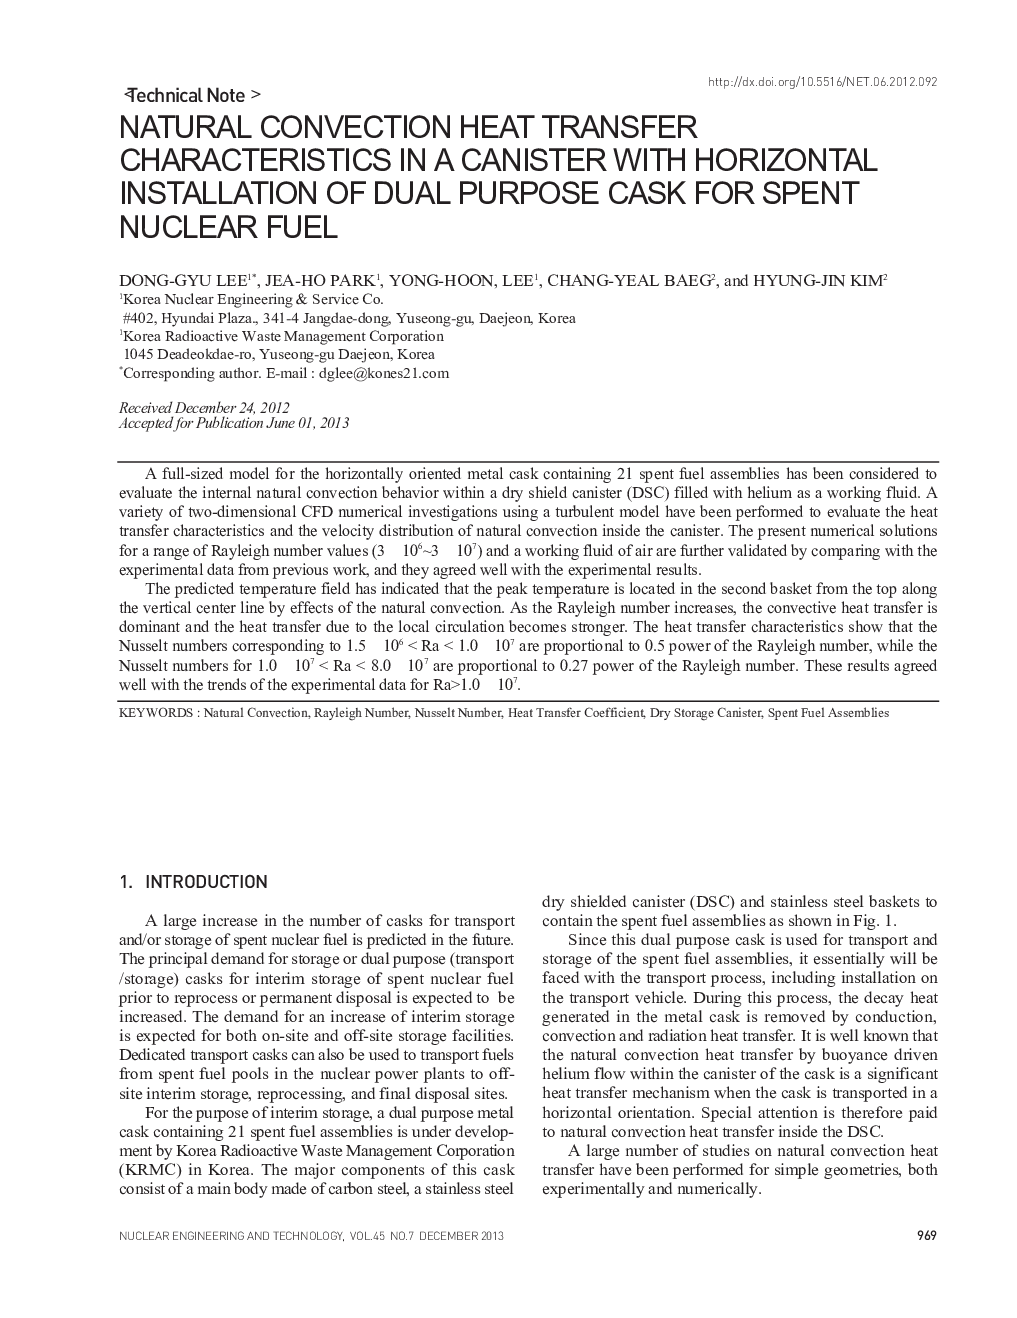 NATURAL CONVECTION HEAT TRANSFER CHARACTERISTICS IN A CANISTER WITH HORIZONTAL INSTALLATION OF DUAL PURPOSE CASK FOR SPENT NUCLEAR FUEL